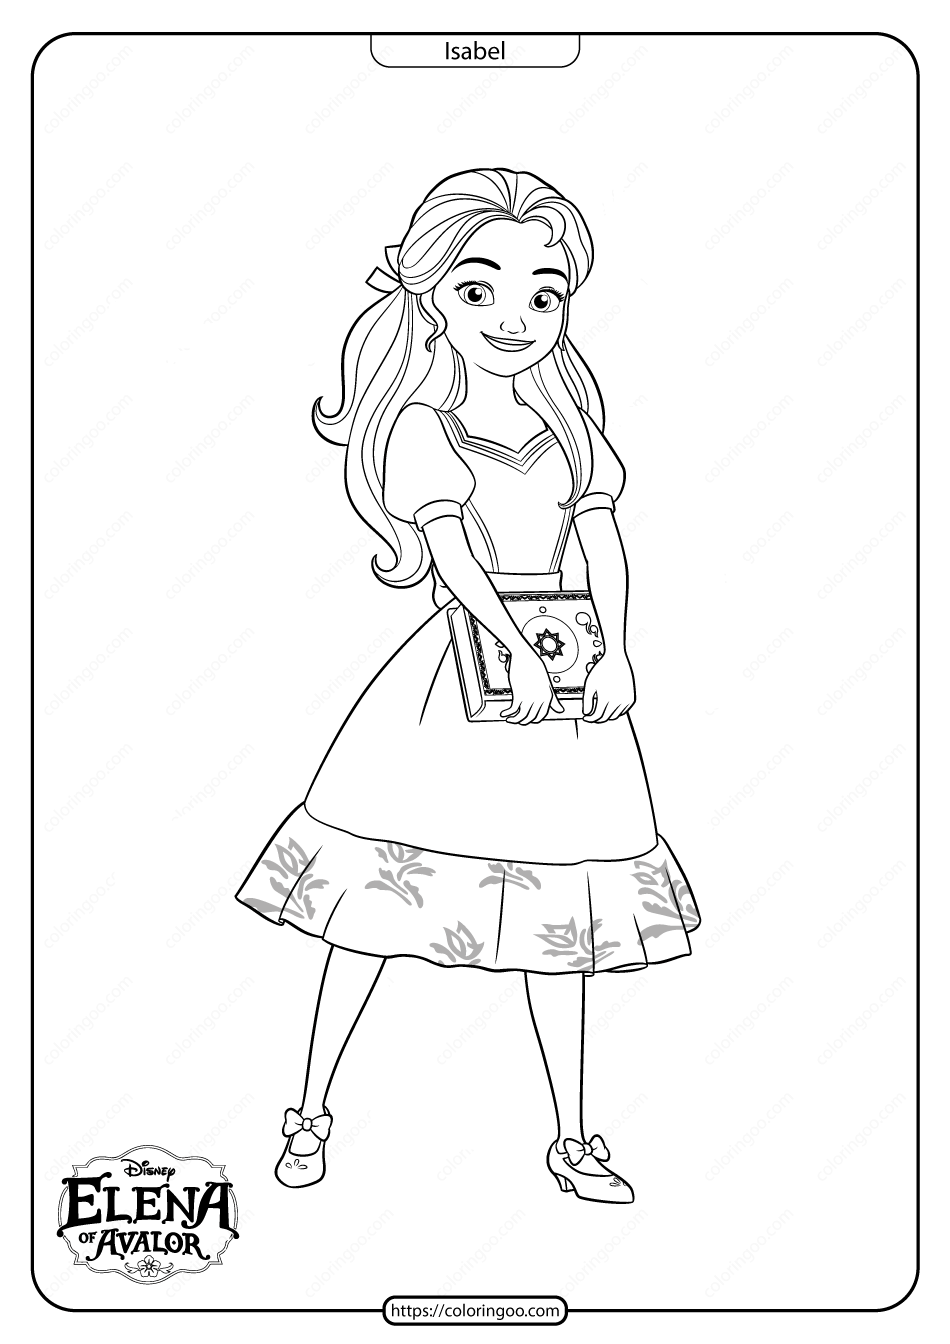 Printable Elena Of Avalor Isabel Coloring Pages | Disney coloring pages,  Princess coloring pages, Coloring pages